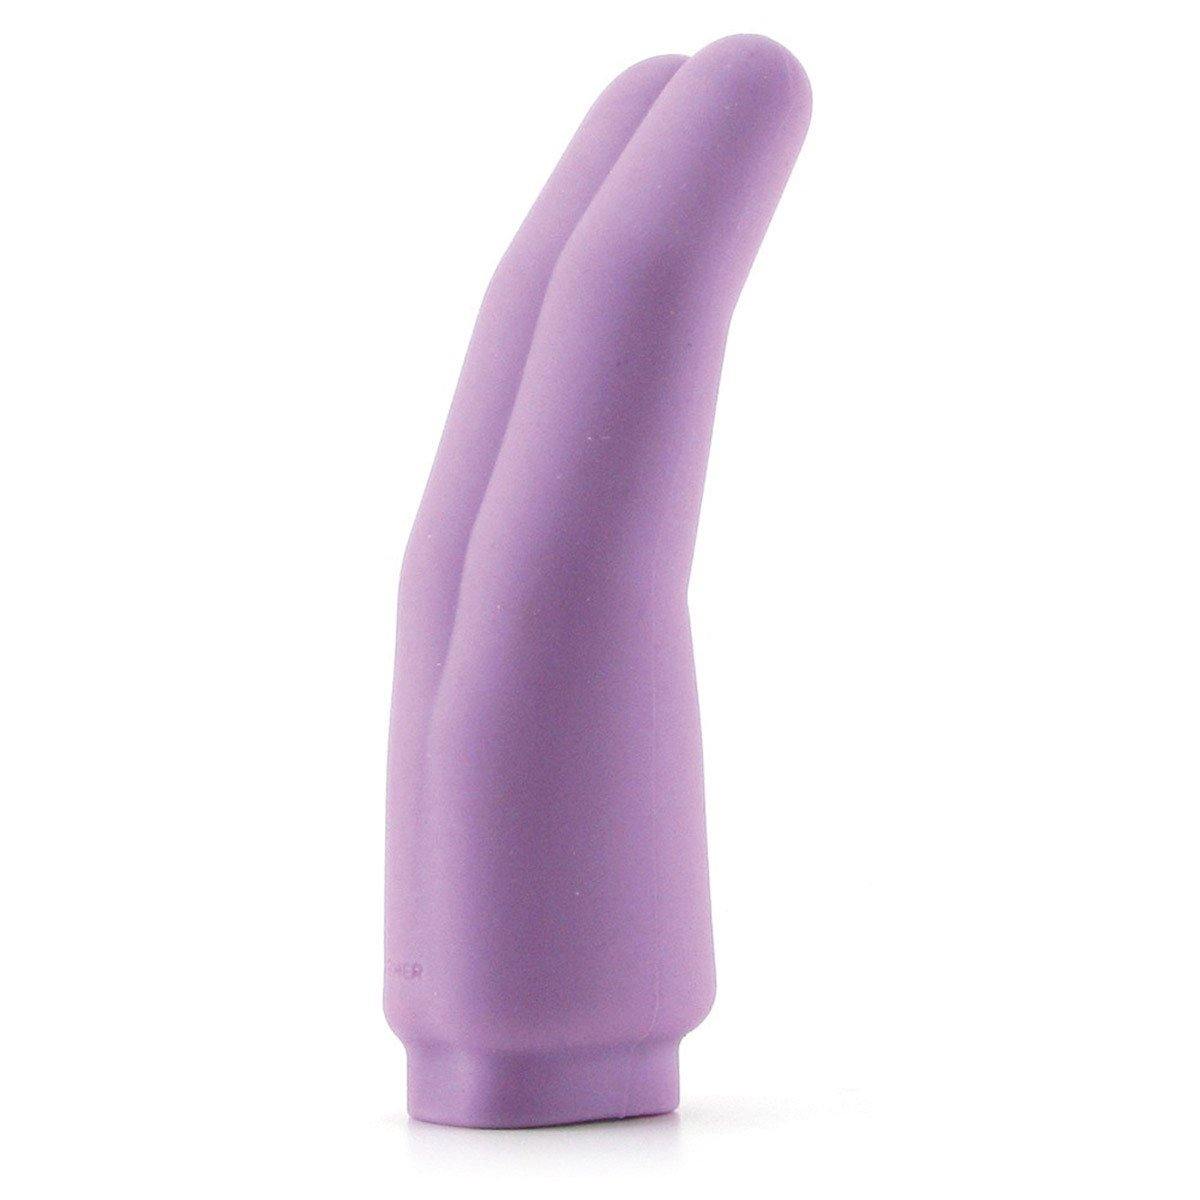 Wet for Her Two - Buy At Luxury Toy X - Free 3-Day Shipping